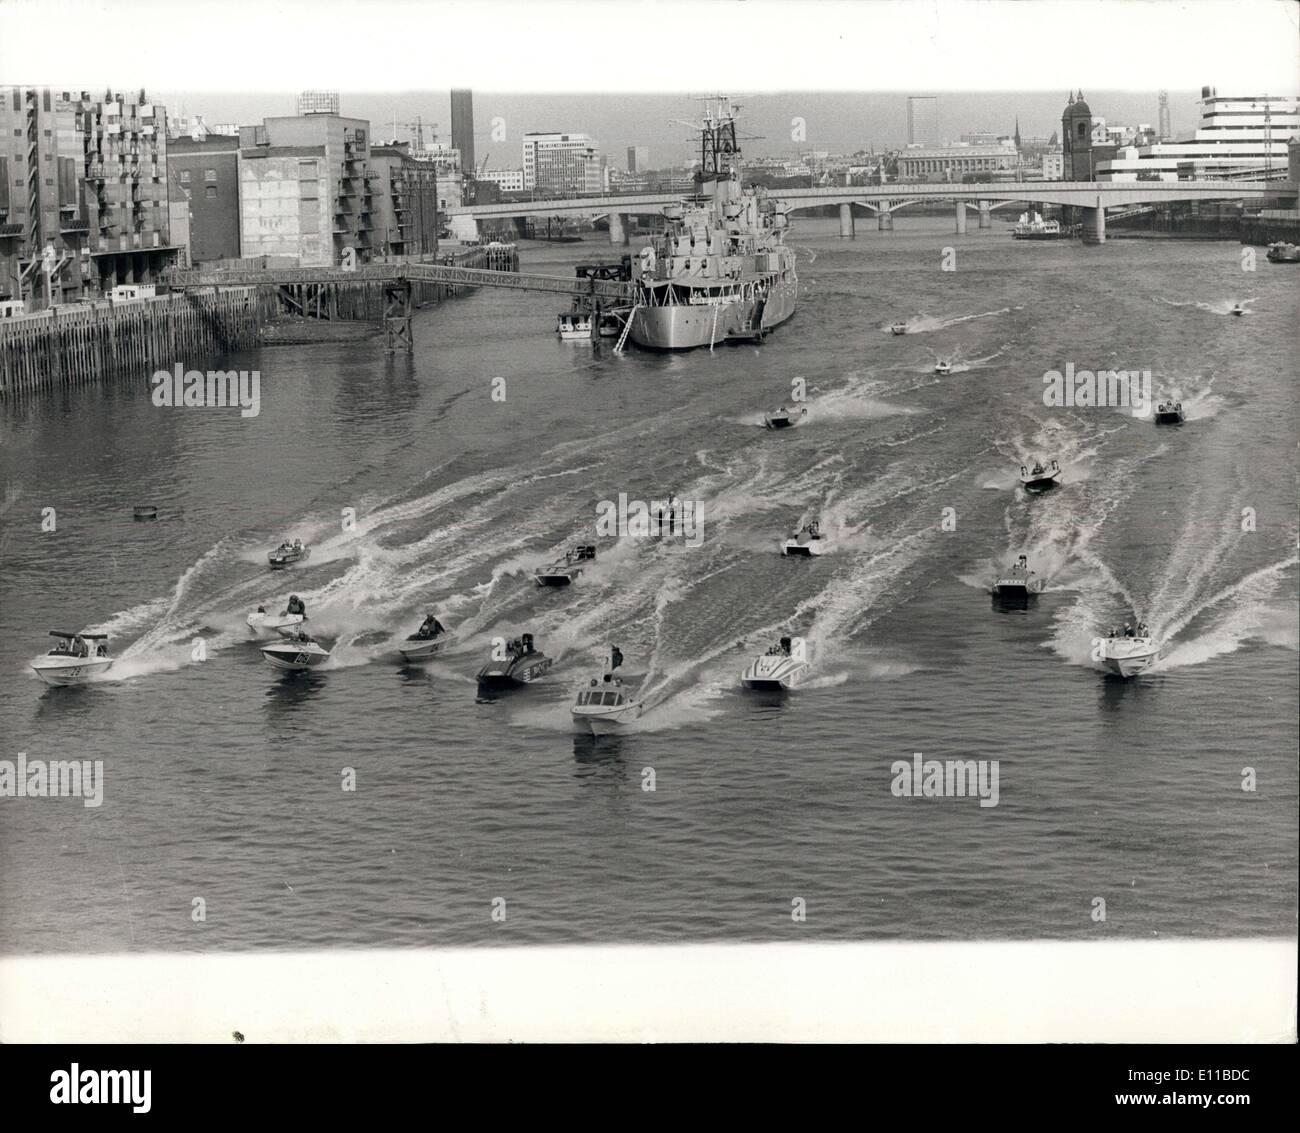 Jul. 12, 1976 - The 14th London-Calais-London Power Boat Race. Photo shows Competitors in the 14th London to Calais and back to Stock Photo